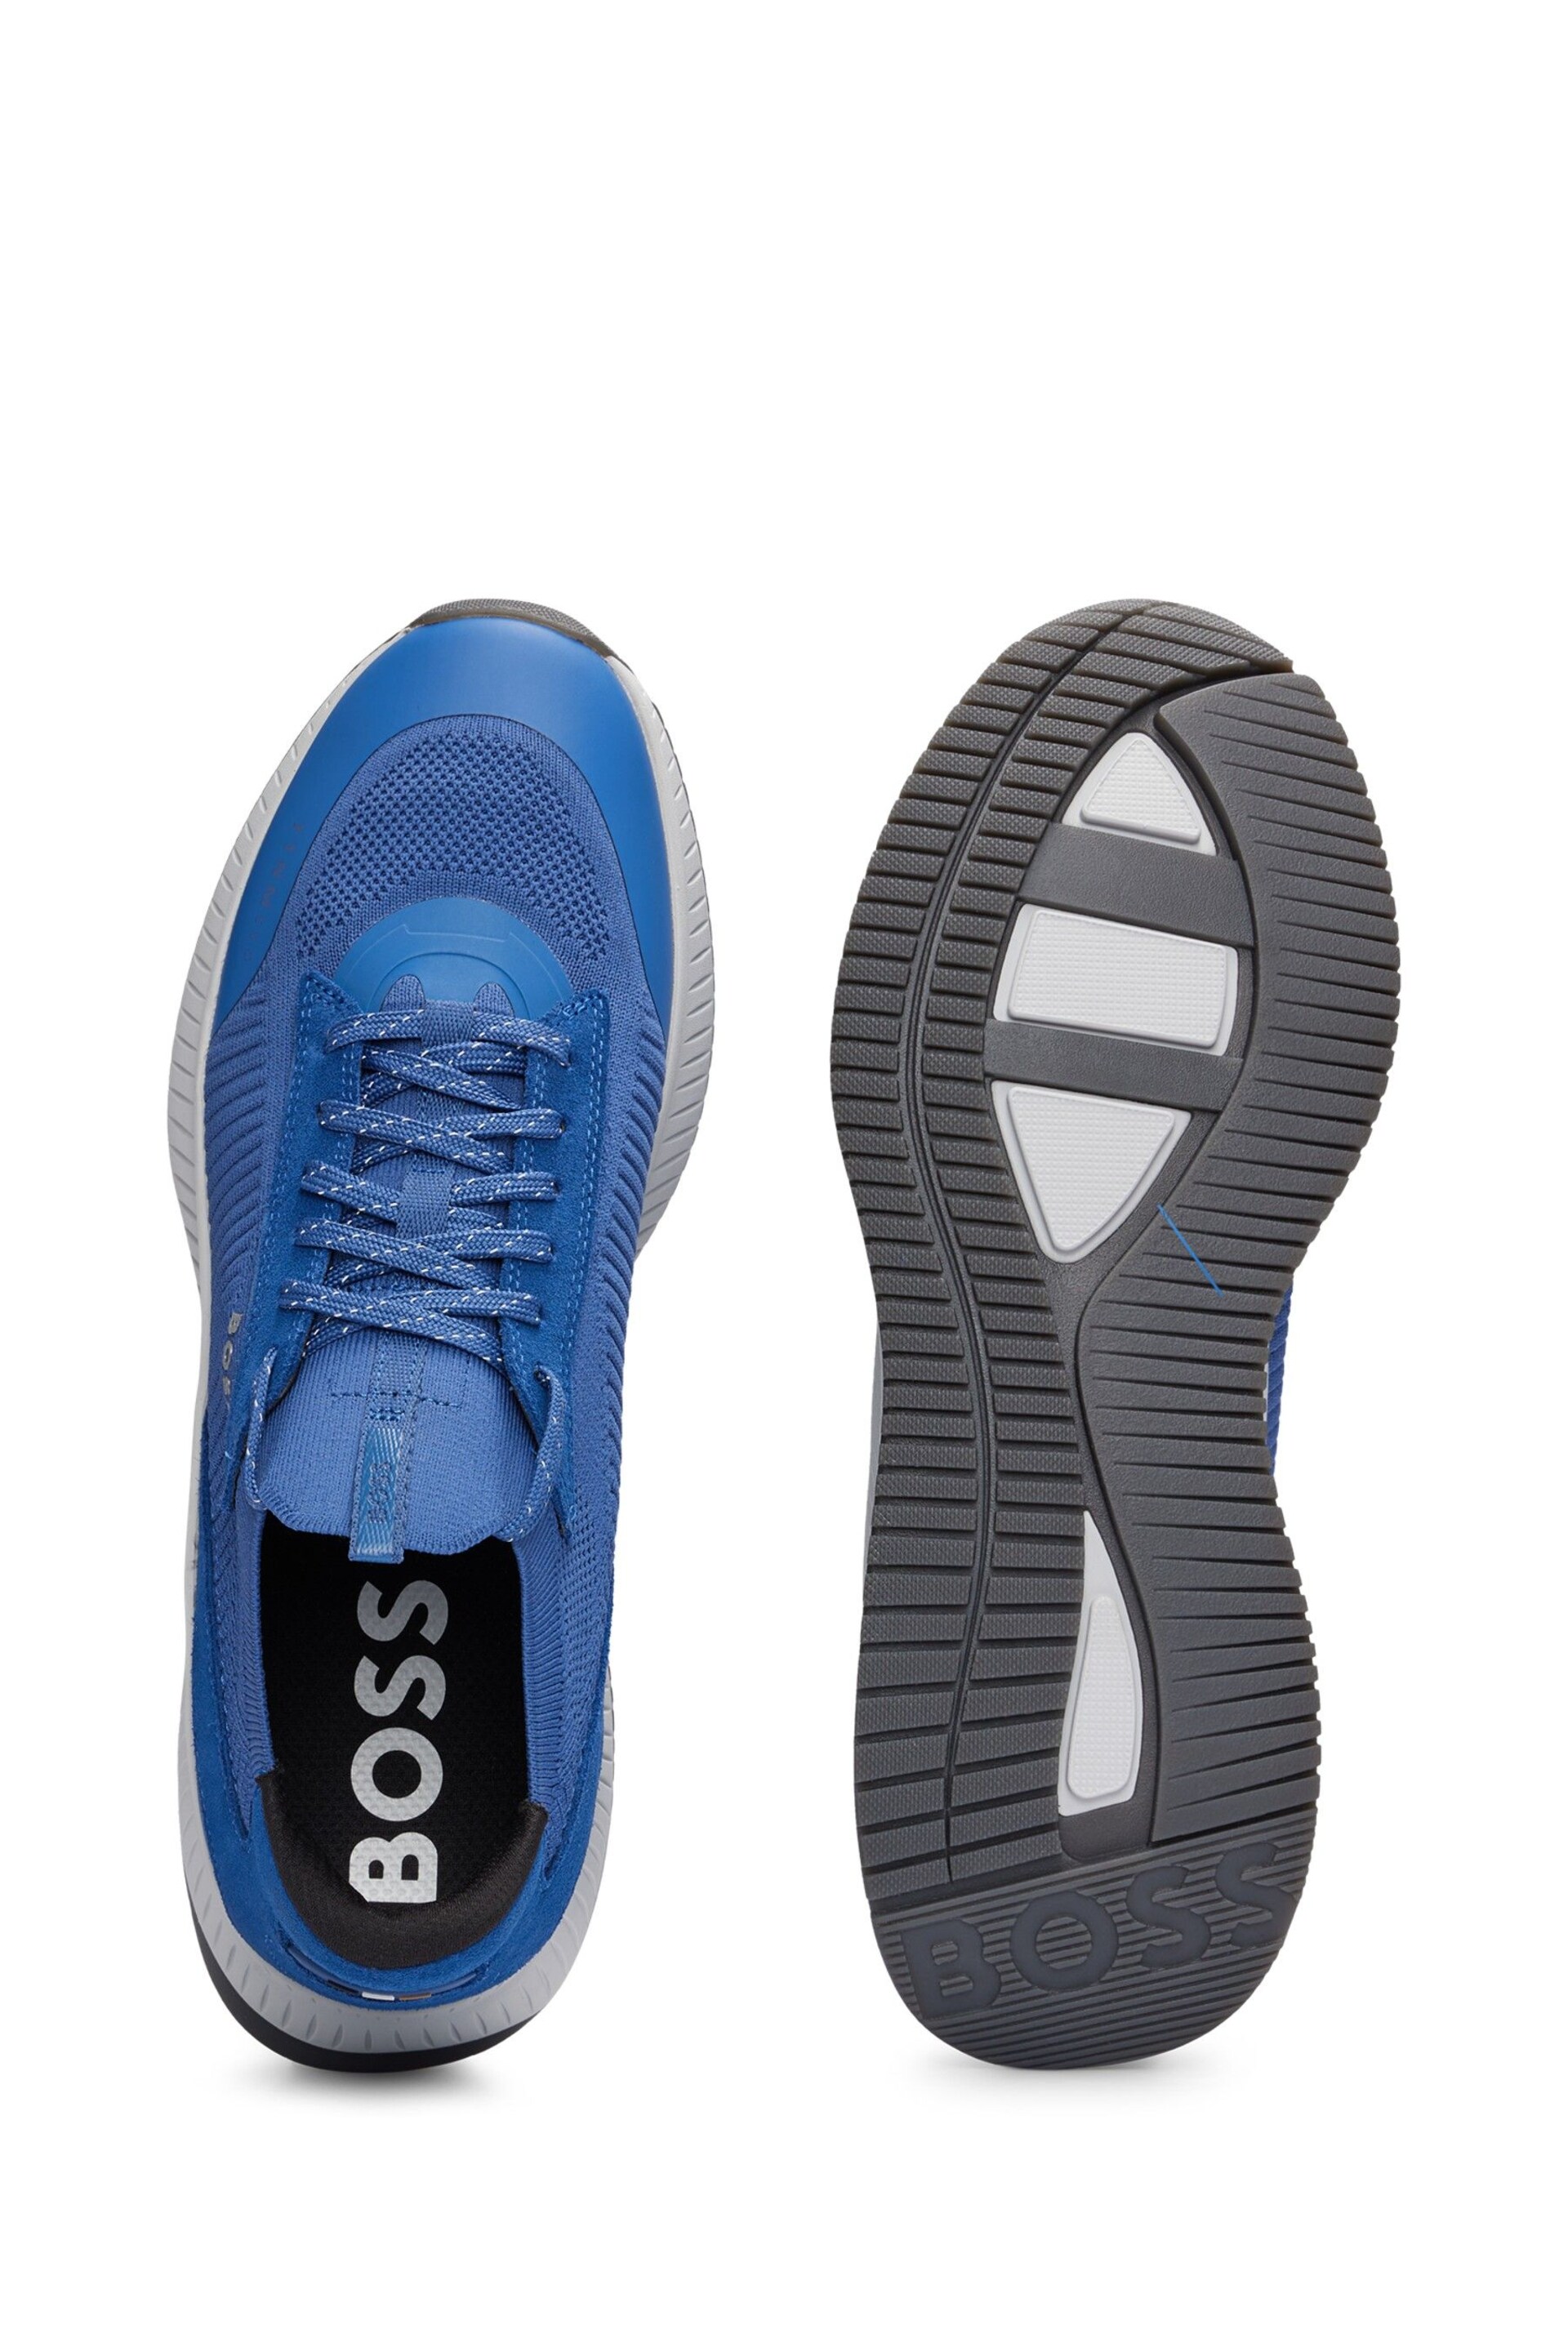 BOSS Blue Chunky Sports Knitted Upper Trainers - Image 4 of 4